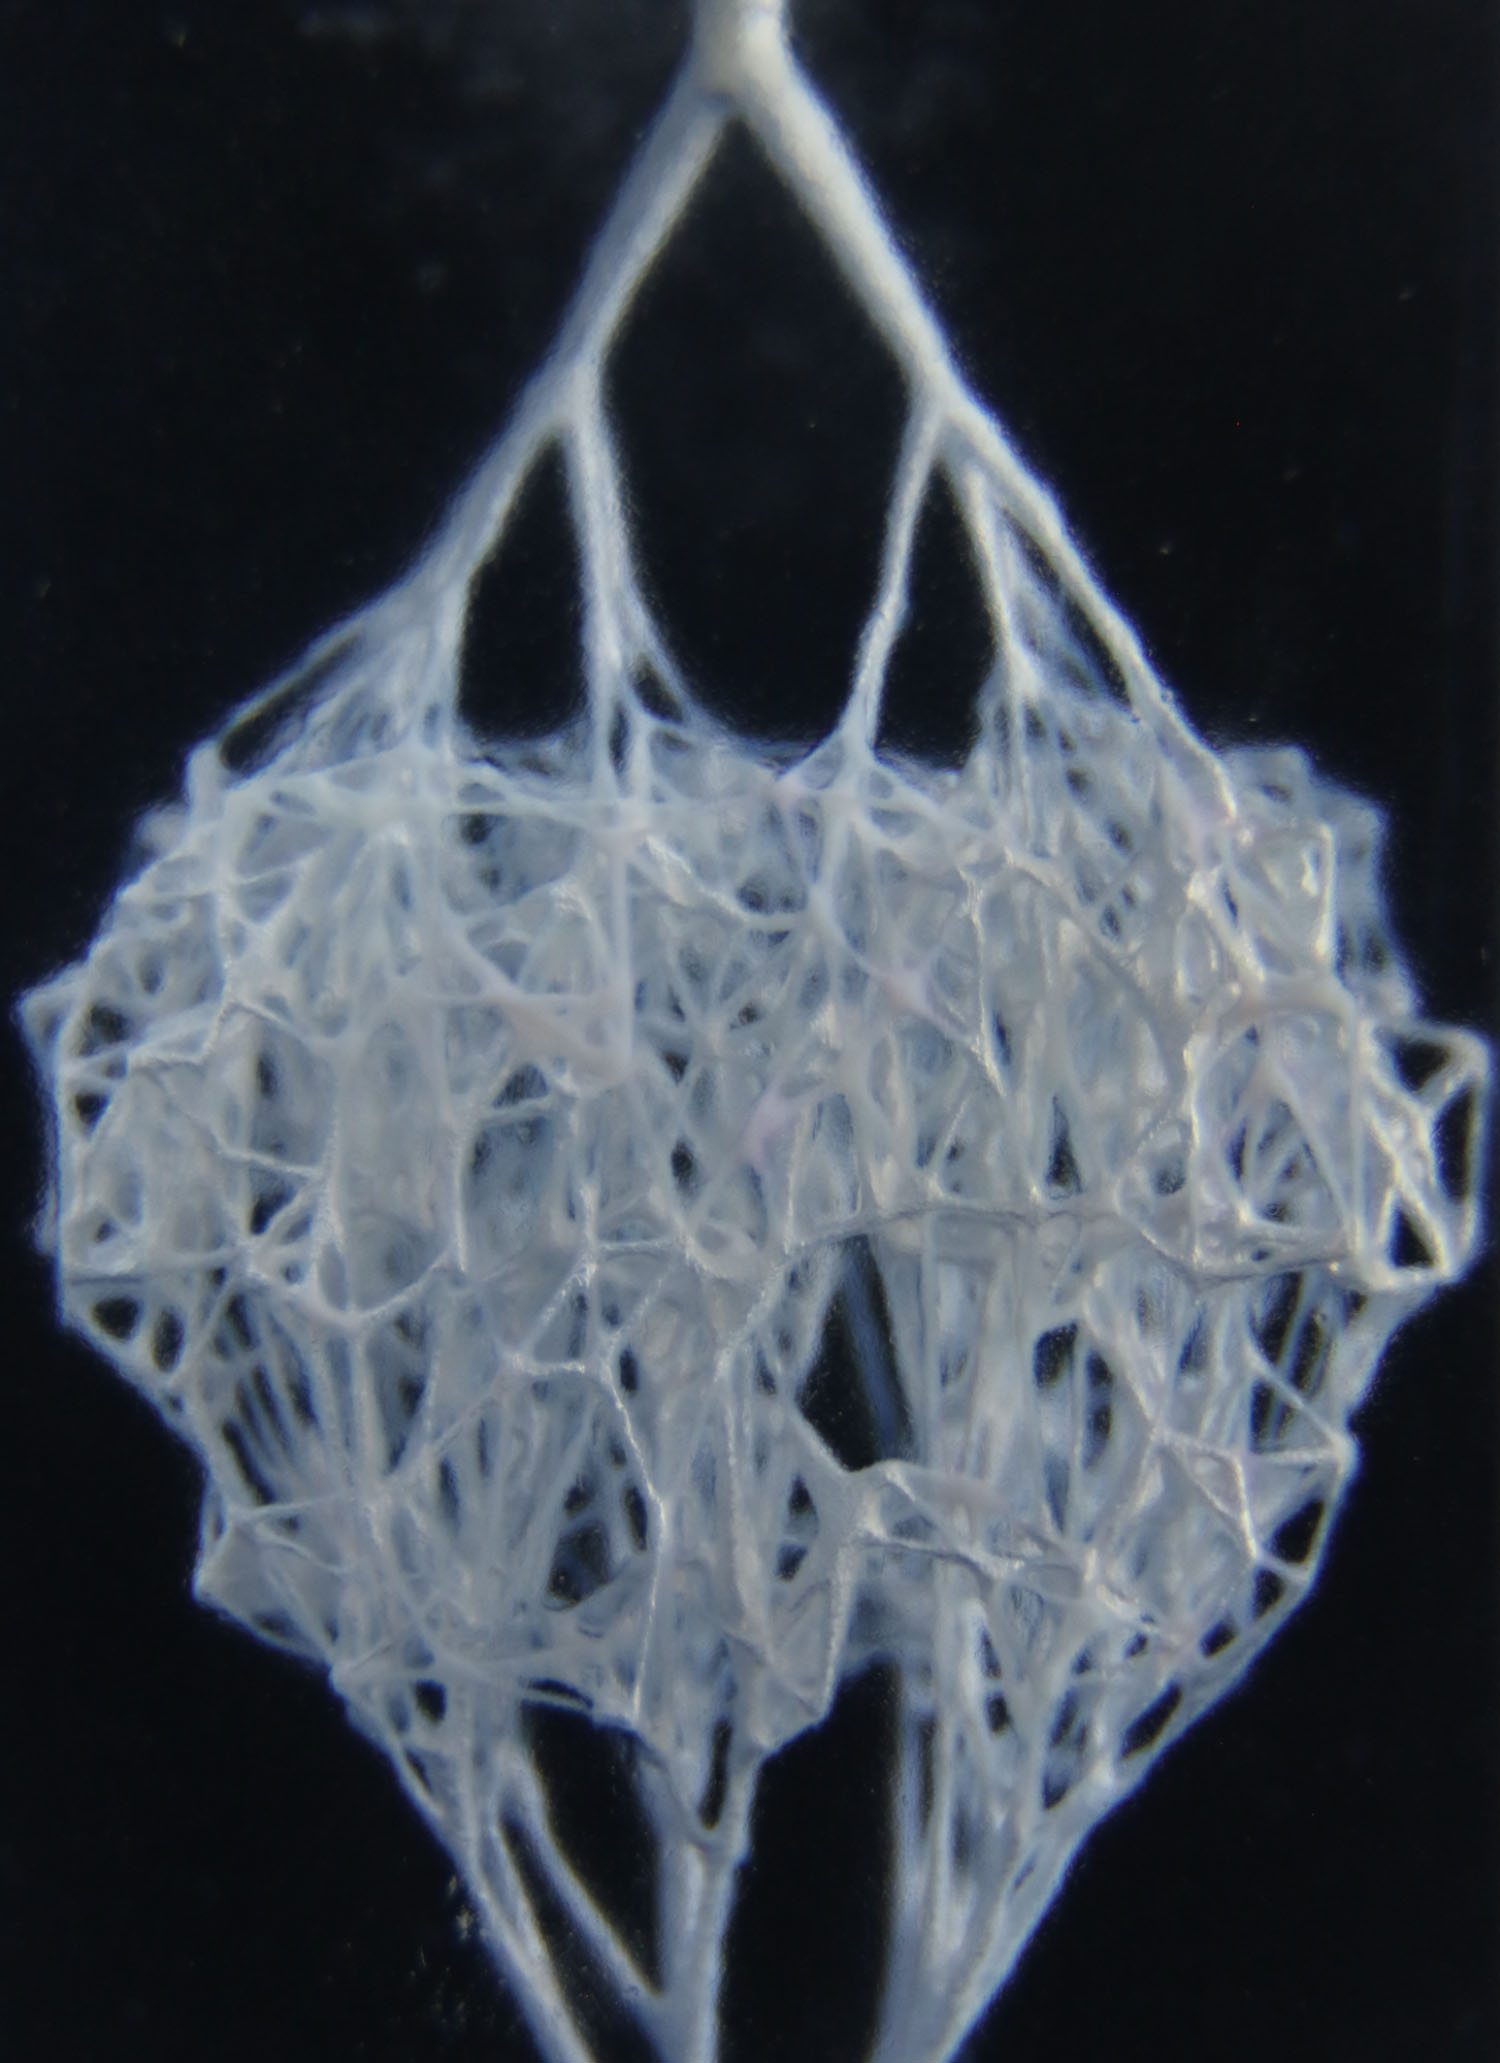 A branching network of channels embedded in plastic